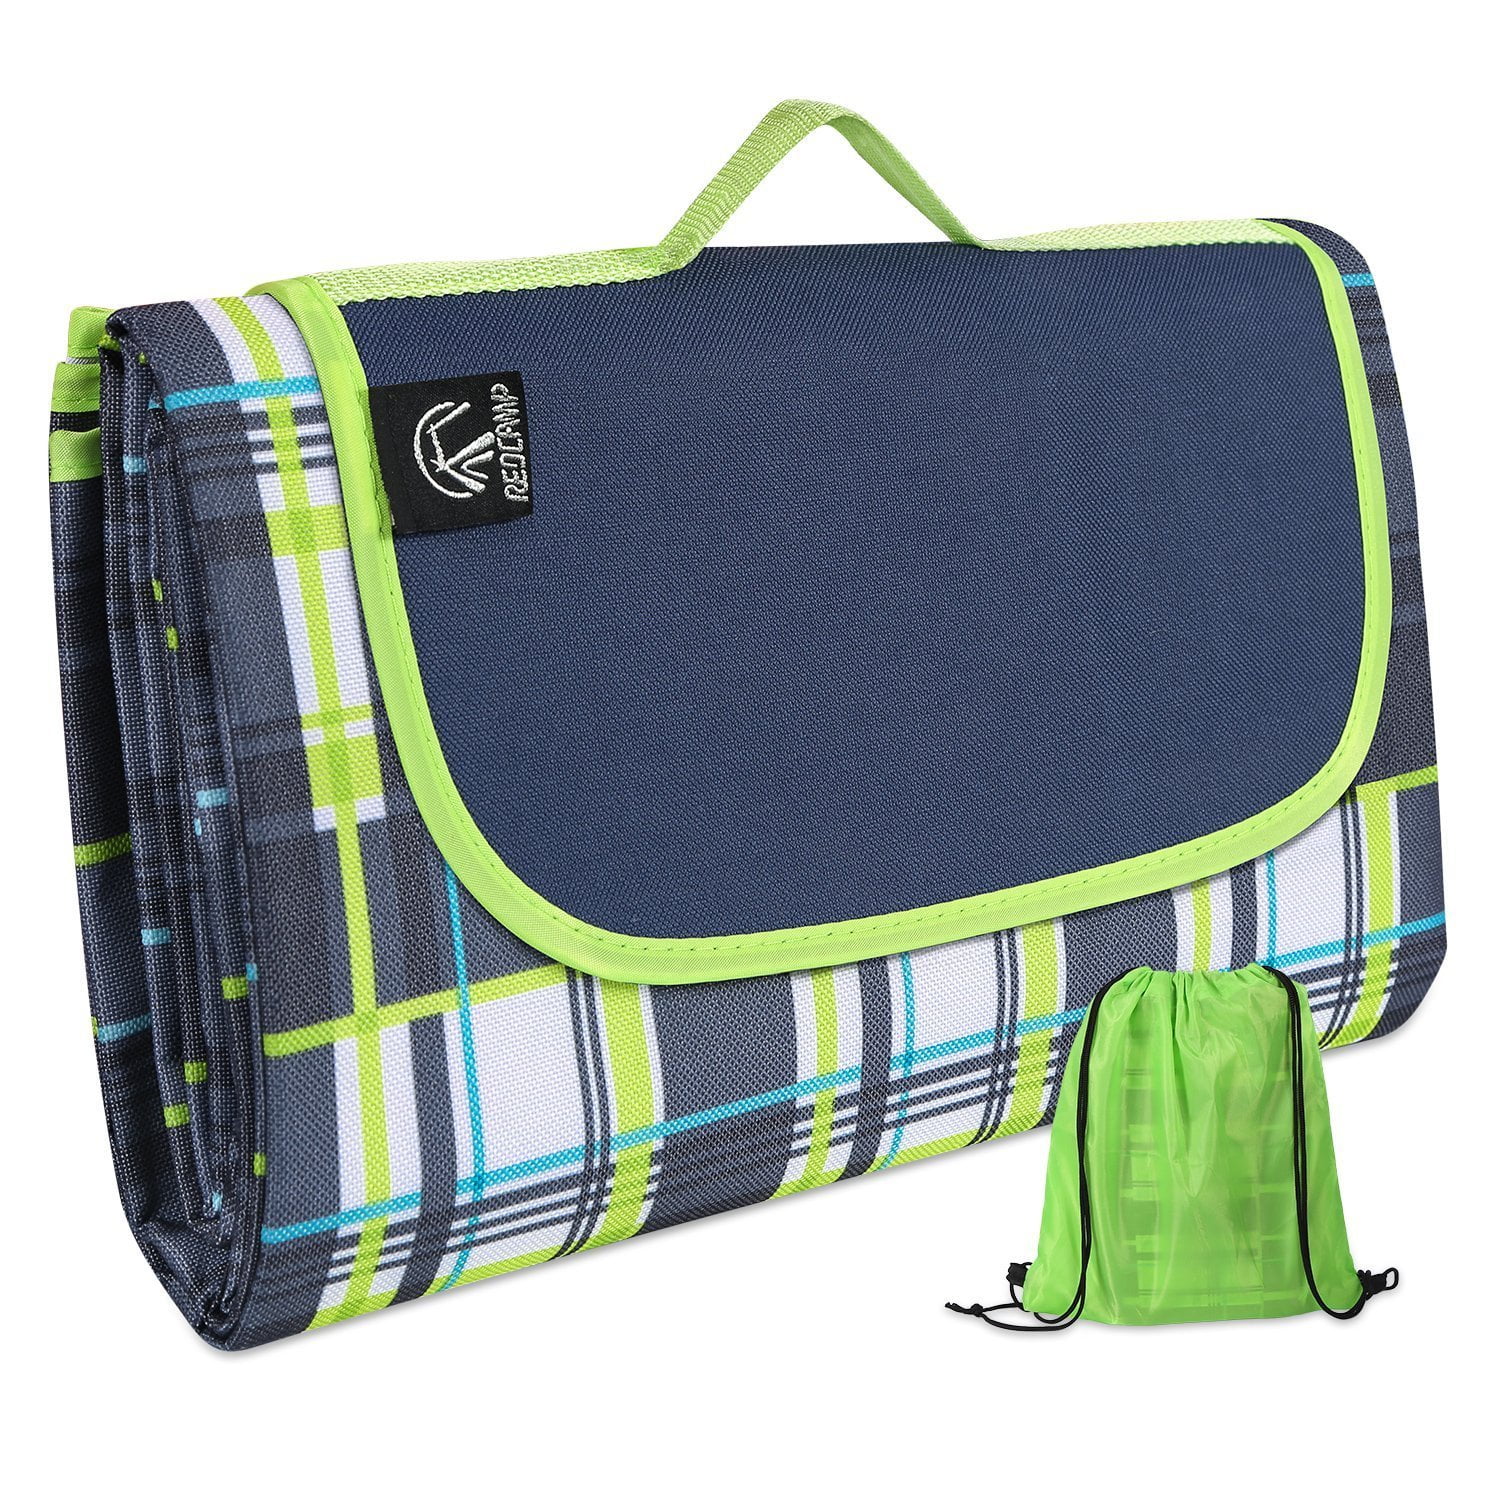 picnic blanket with carry strap